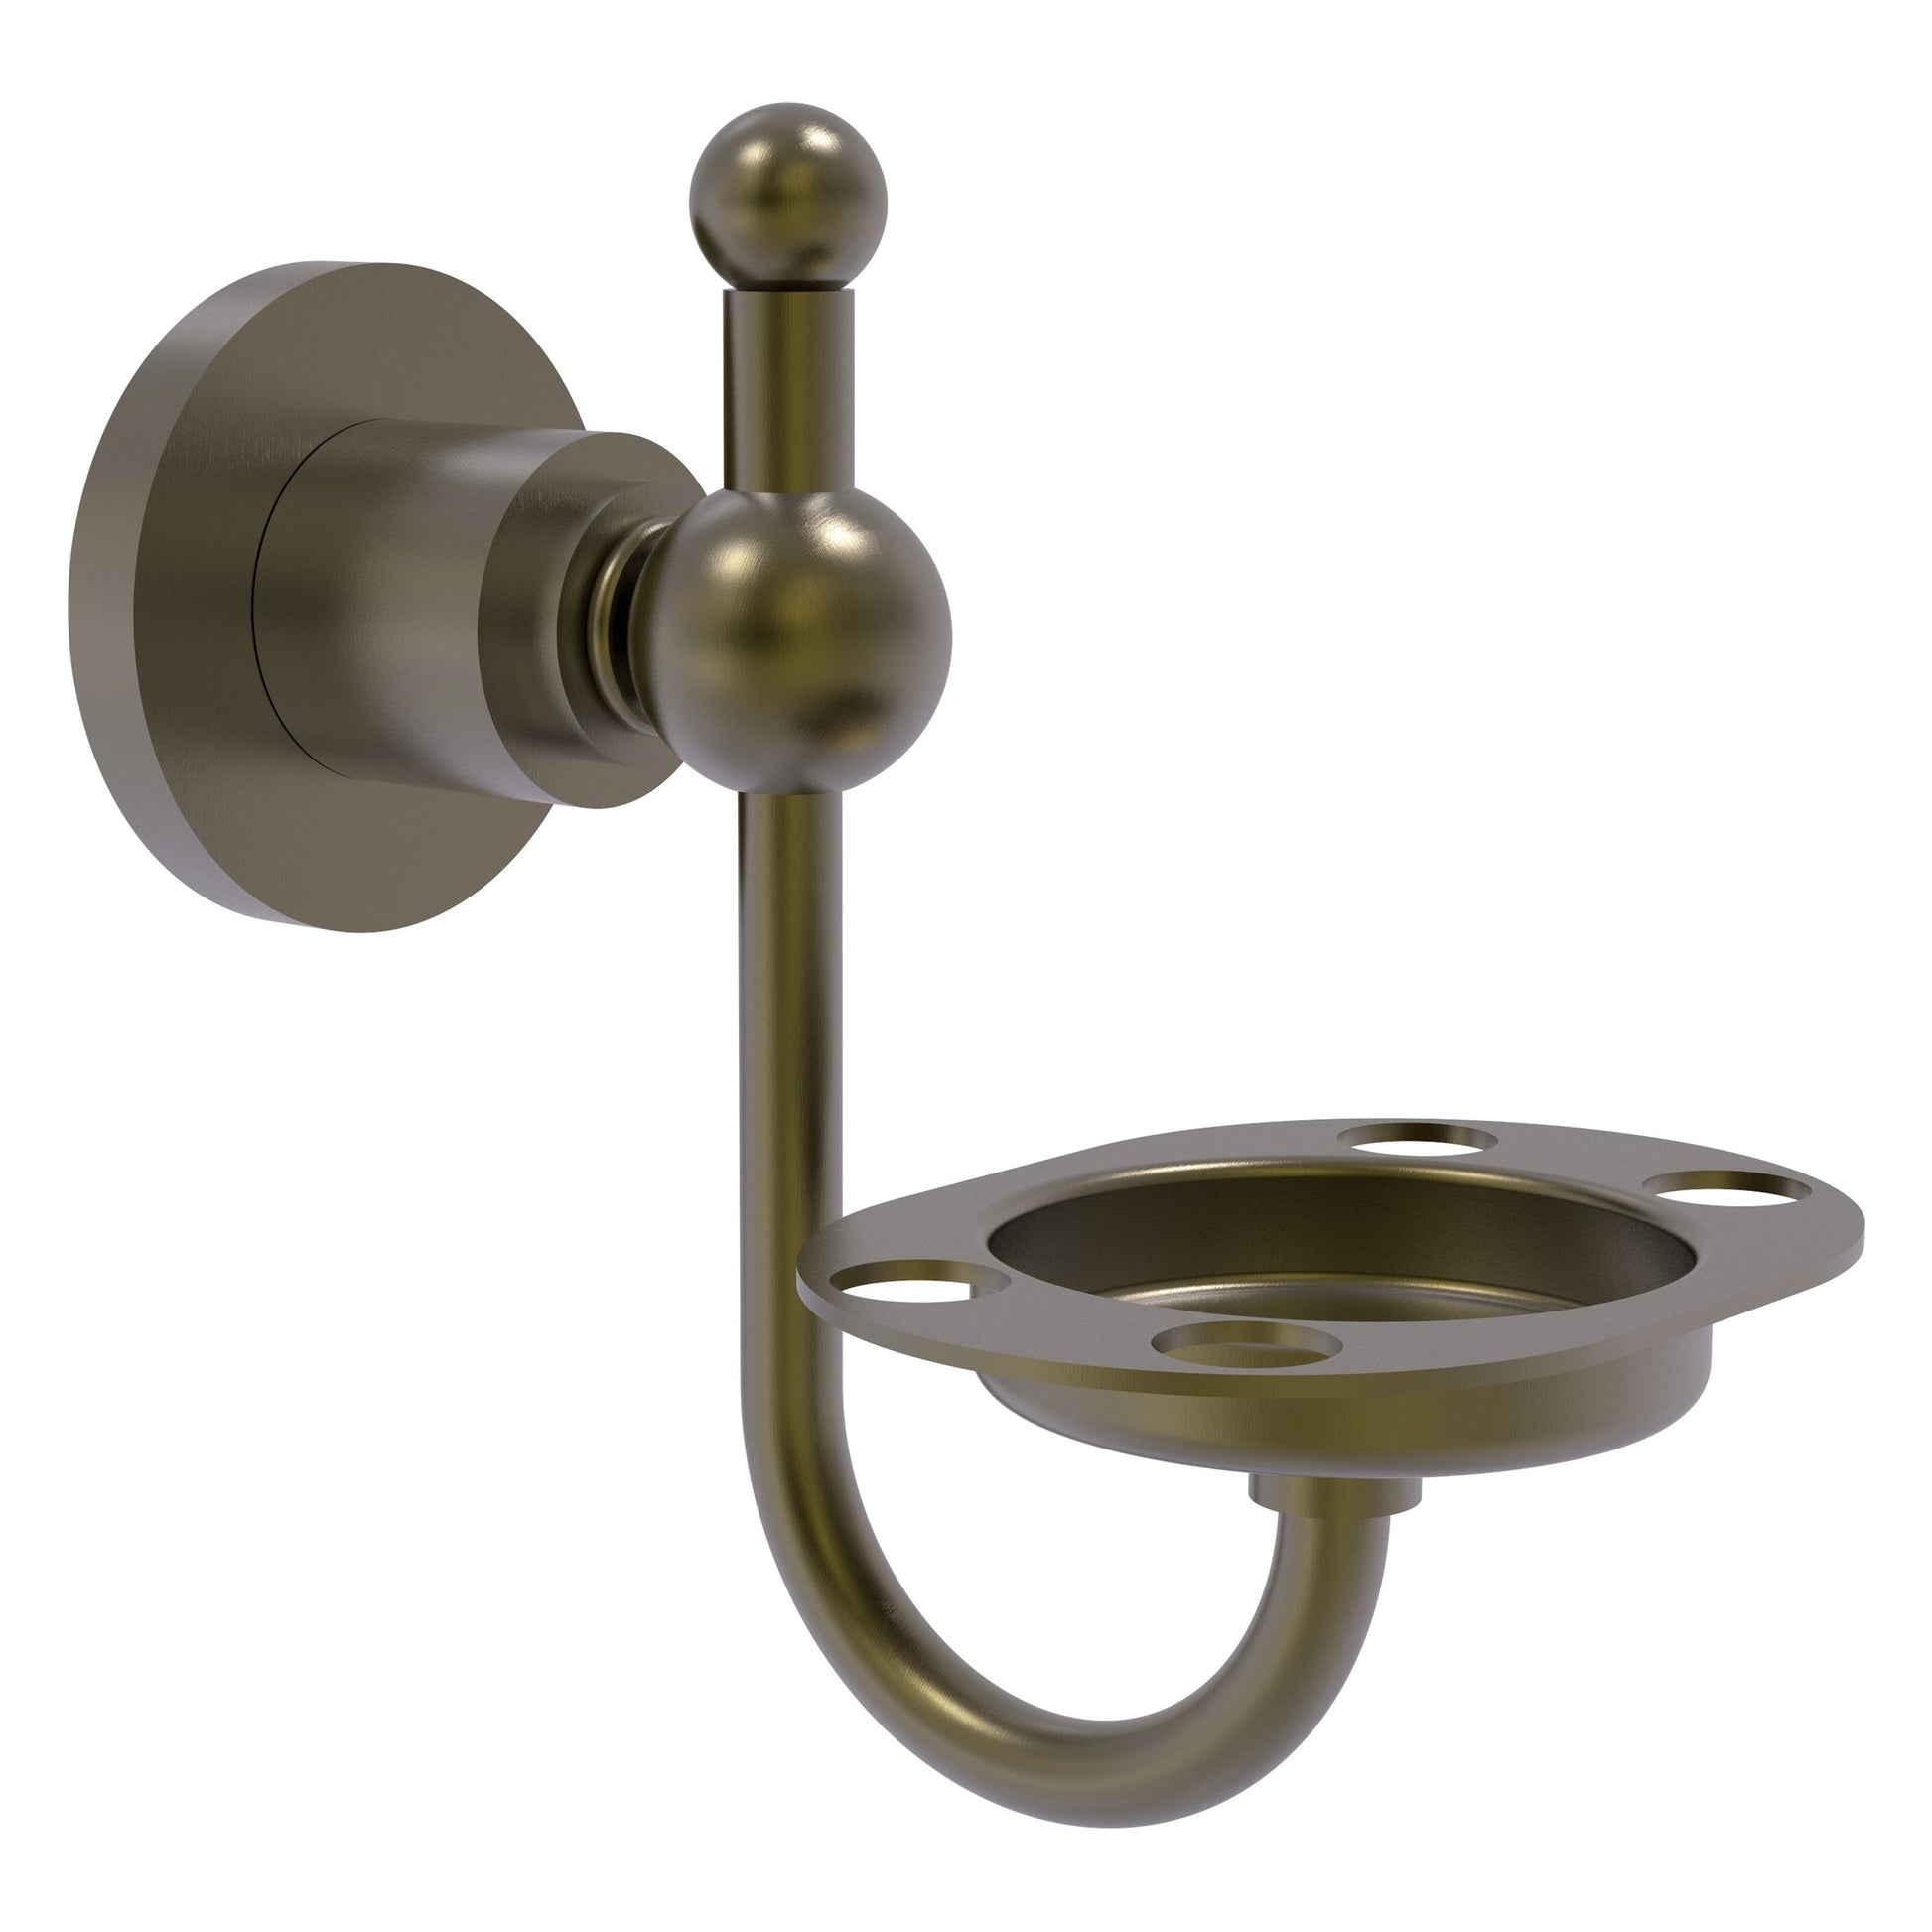 Allied Brass Astor Place 4.3" x 3.5" Antique Brass Solid Brass Wall-Mounted Tumbler Toothbrush Holder